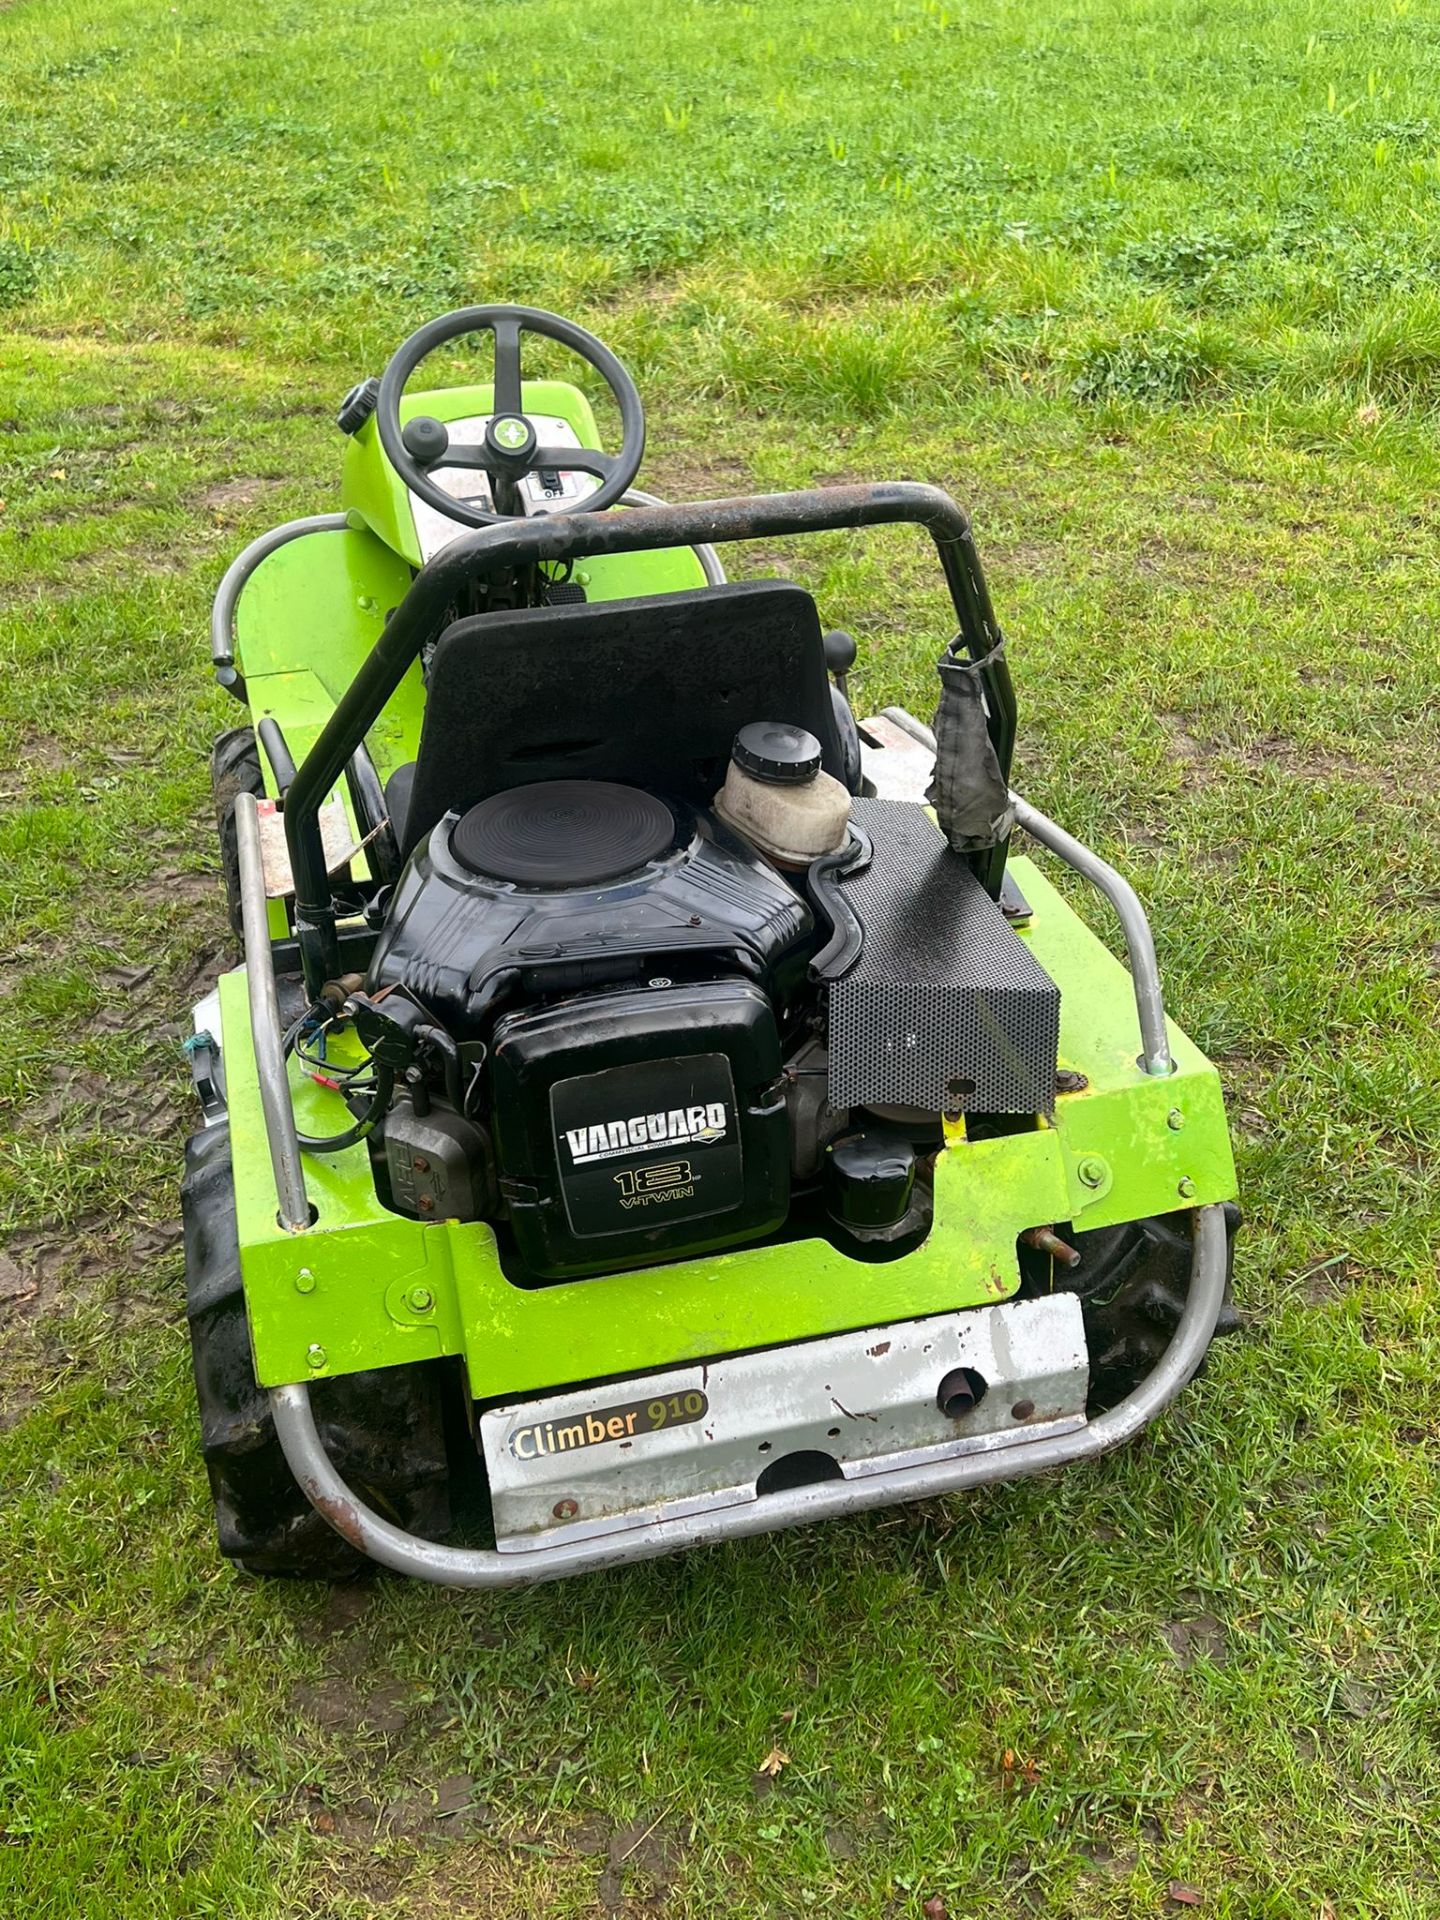 GRILLO CLIMBER 910 RIDE ON LAWN MOWER BANK MOWER - 18HP V TWIN BRIGGS AND STRATTON ENGINE *PLUS VAT* - Image 5 of 8